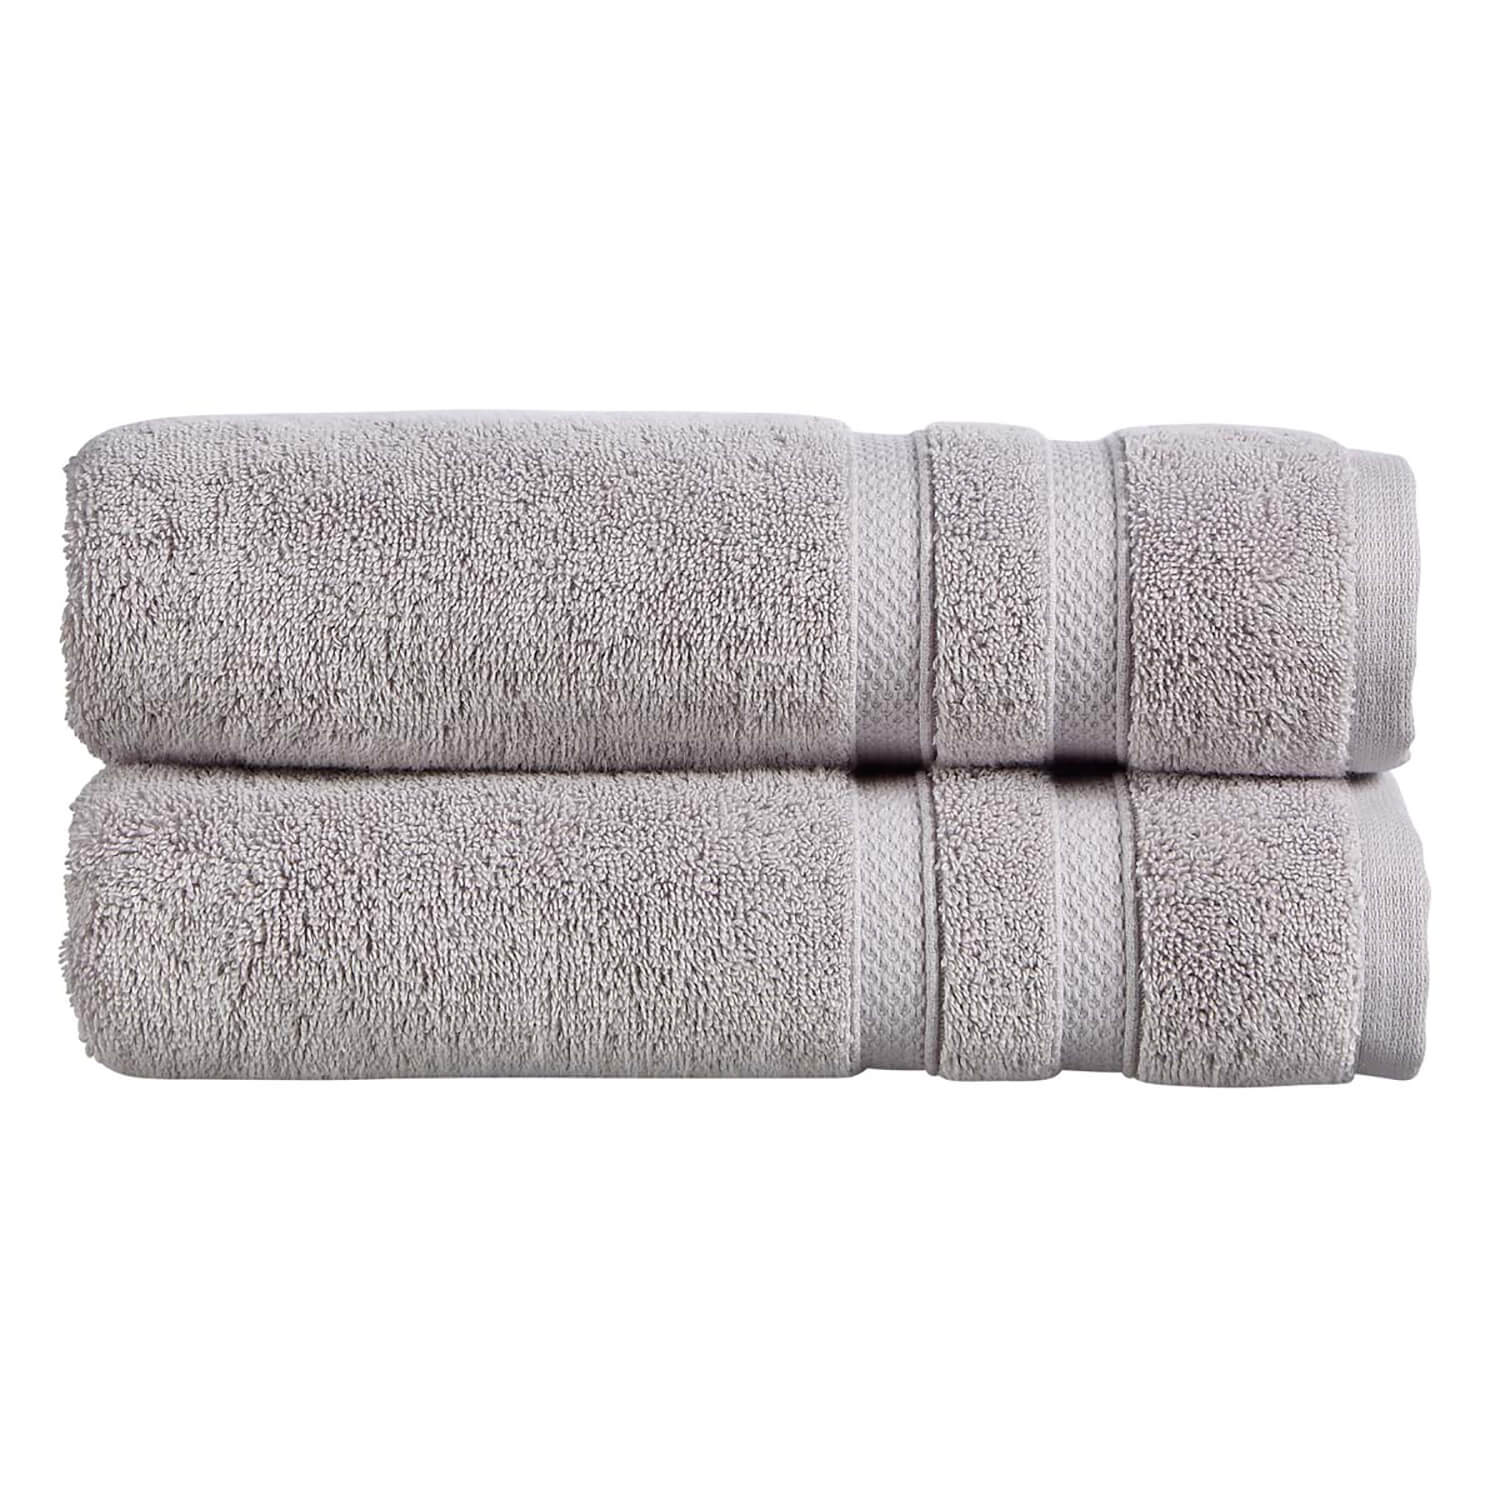 Christy Chroma Hand Towel - Dove Grey 1 Shaws Department Stores